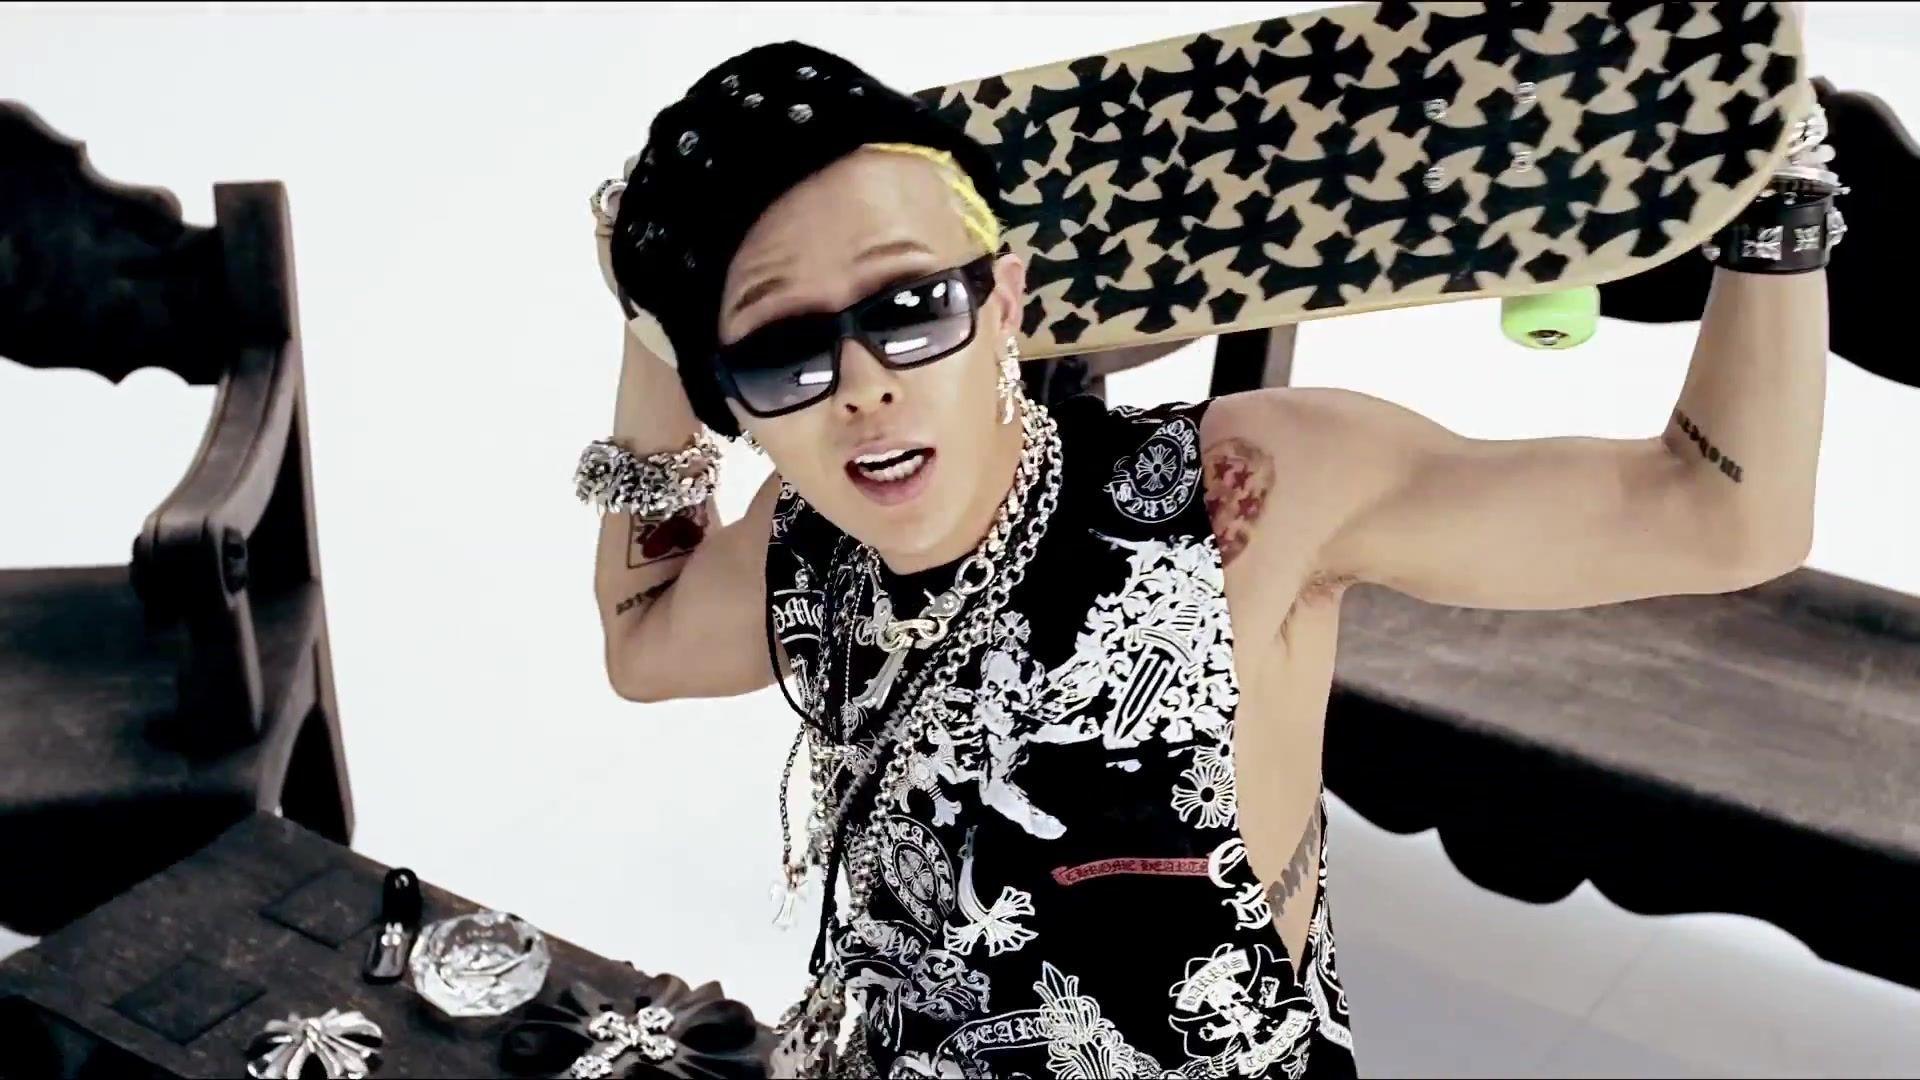 Moving Society: Download GDragon Wallpaper for Android